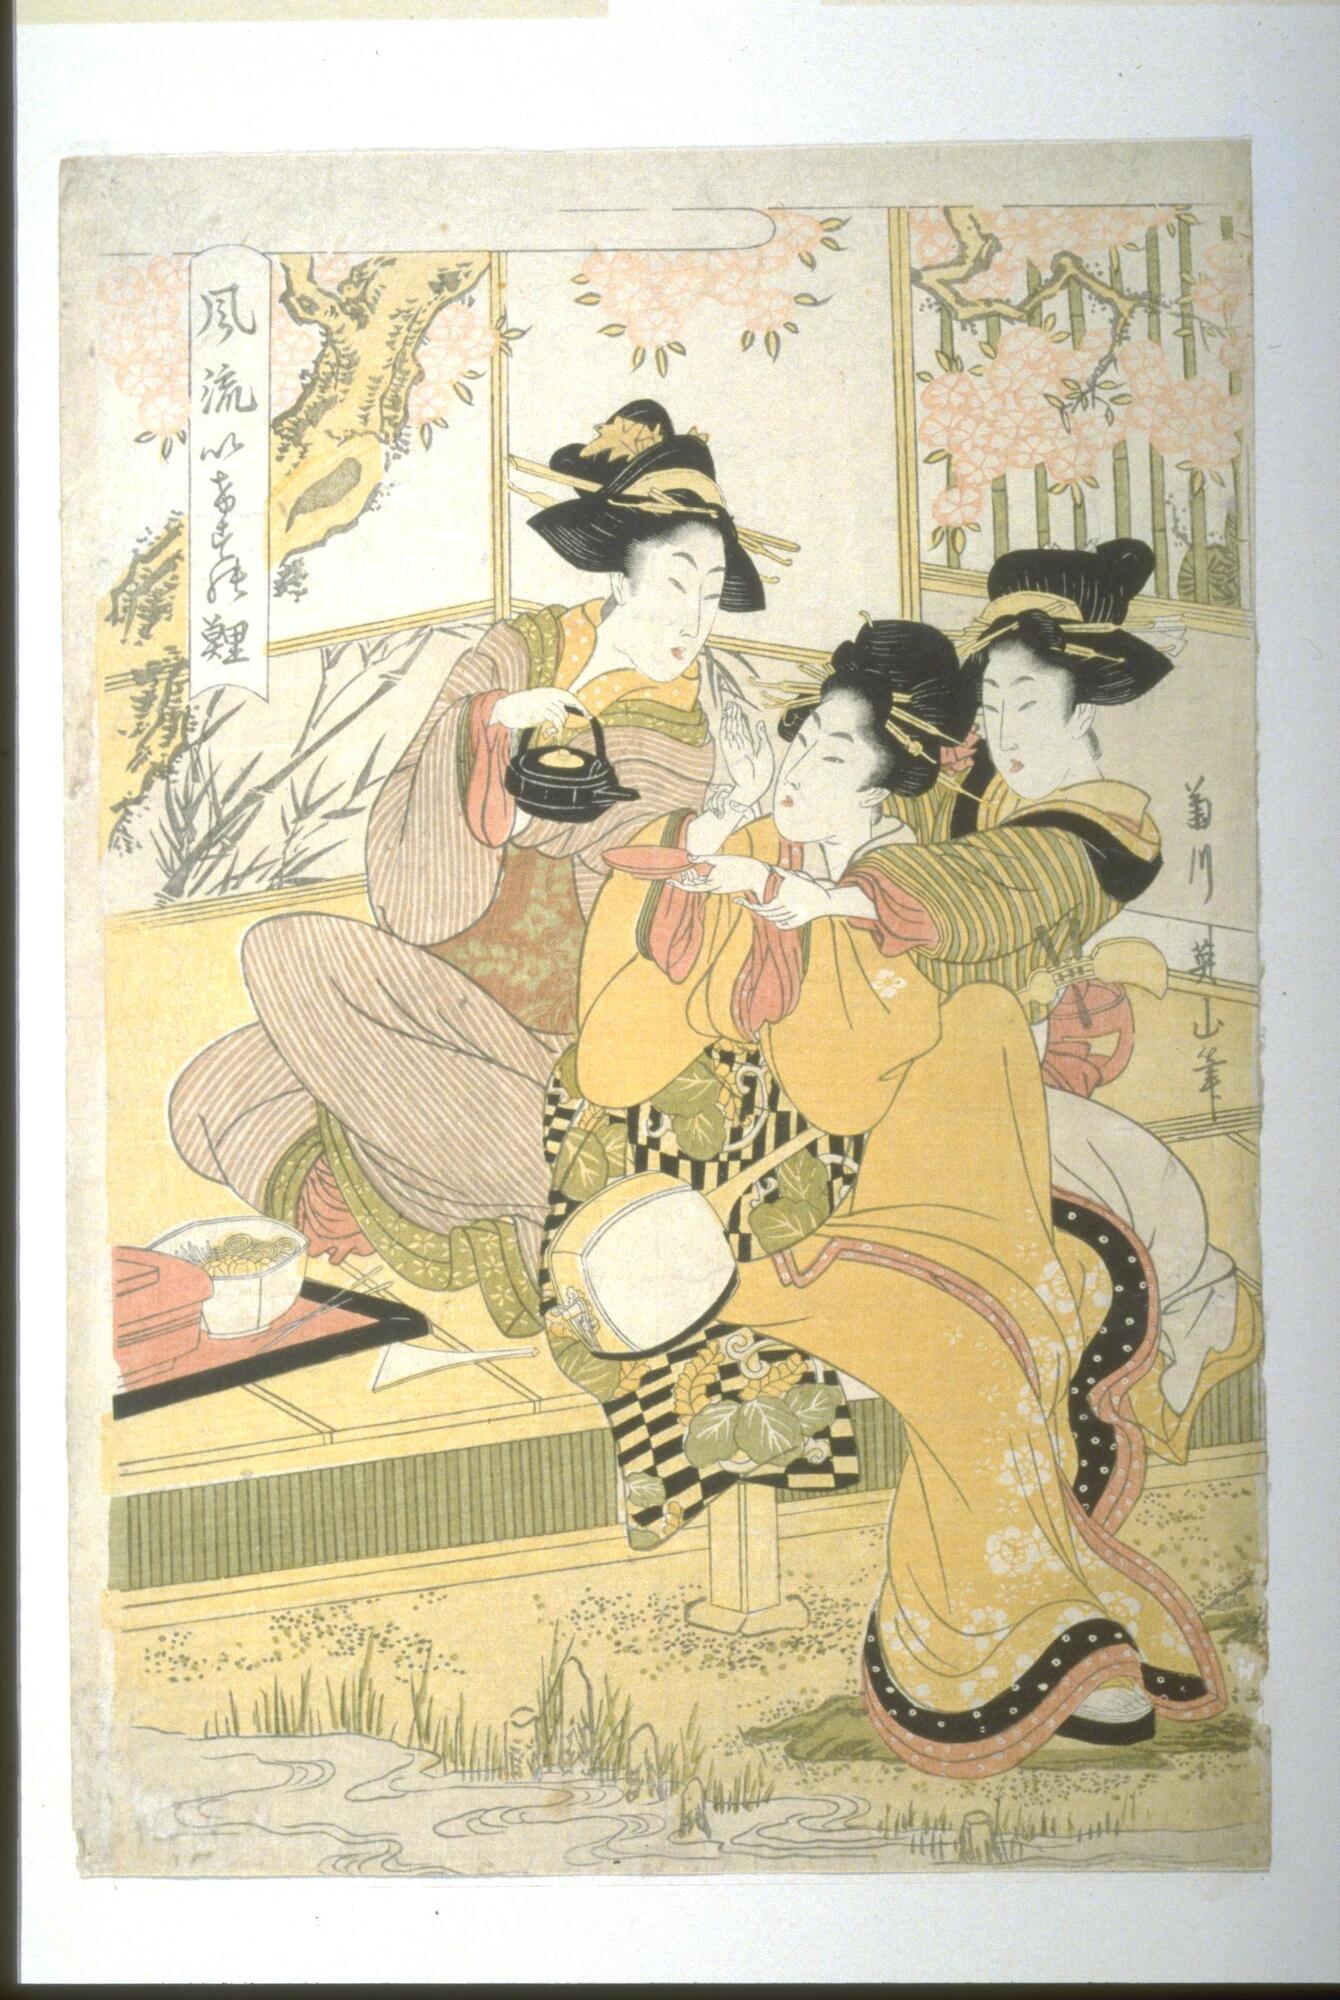 Three courtesans engaged in a drinking game sit in an open veranda in early spring, with cherry blossoms in full bloom behind them. The women appear tipsy, and the one at the right clings to her companion in the middle for support, as she stretches out her left hand to have her cup refilled with saké (rice wine). They have a tray of delicacies shamisen at their feet.